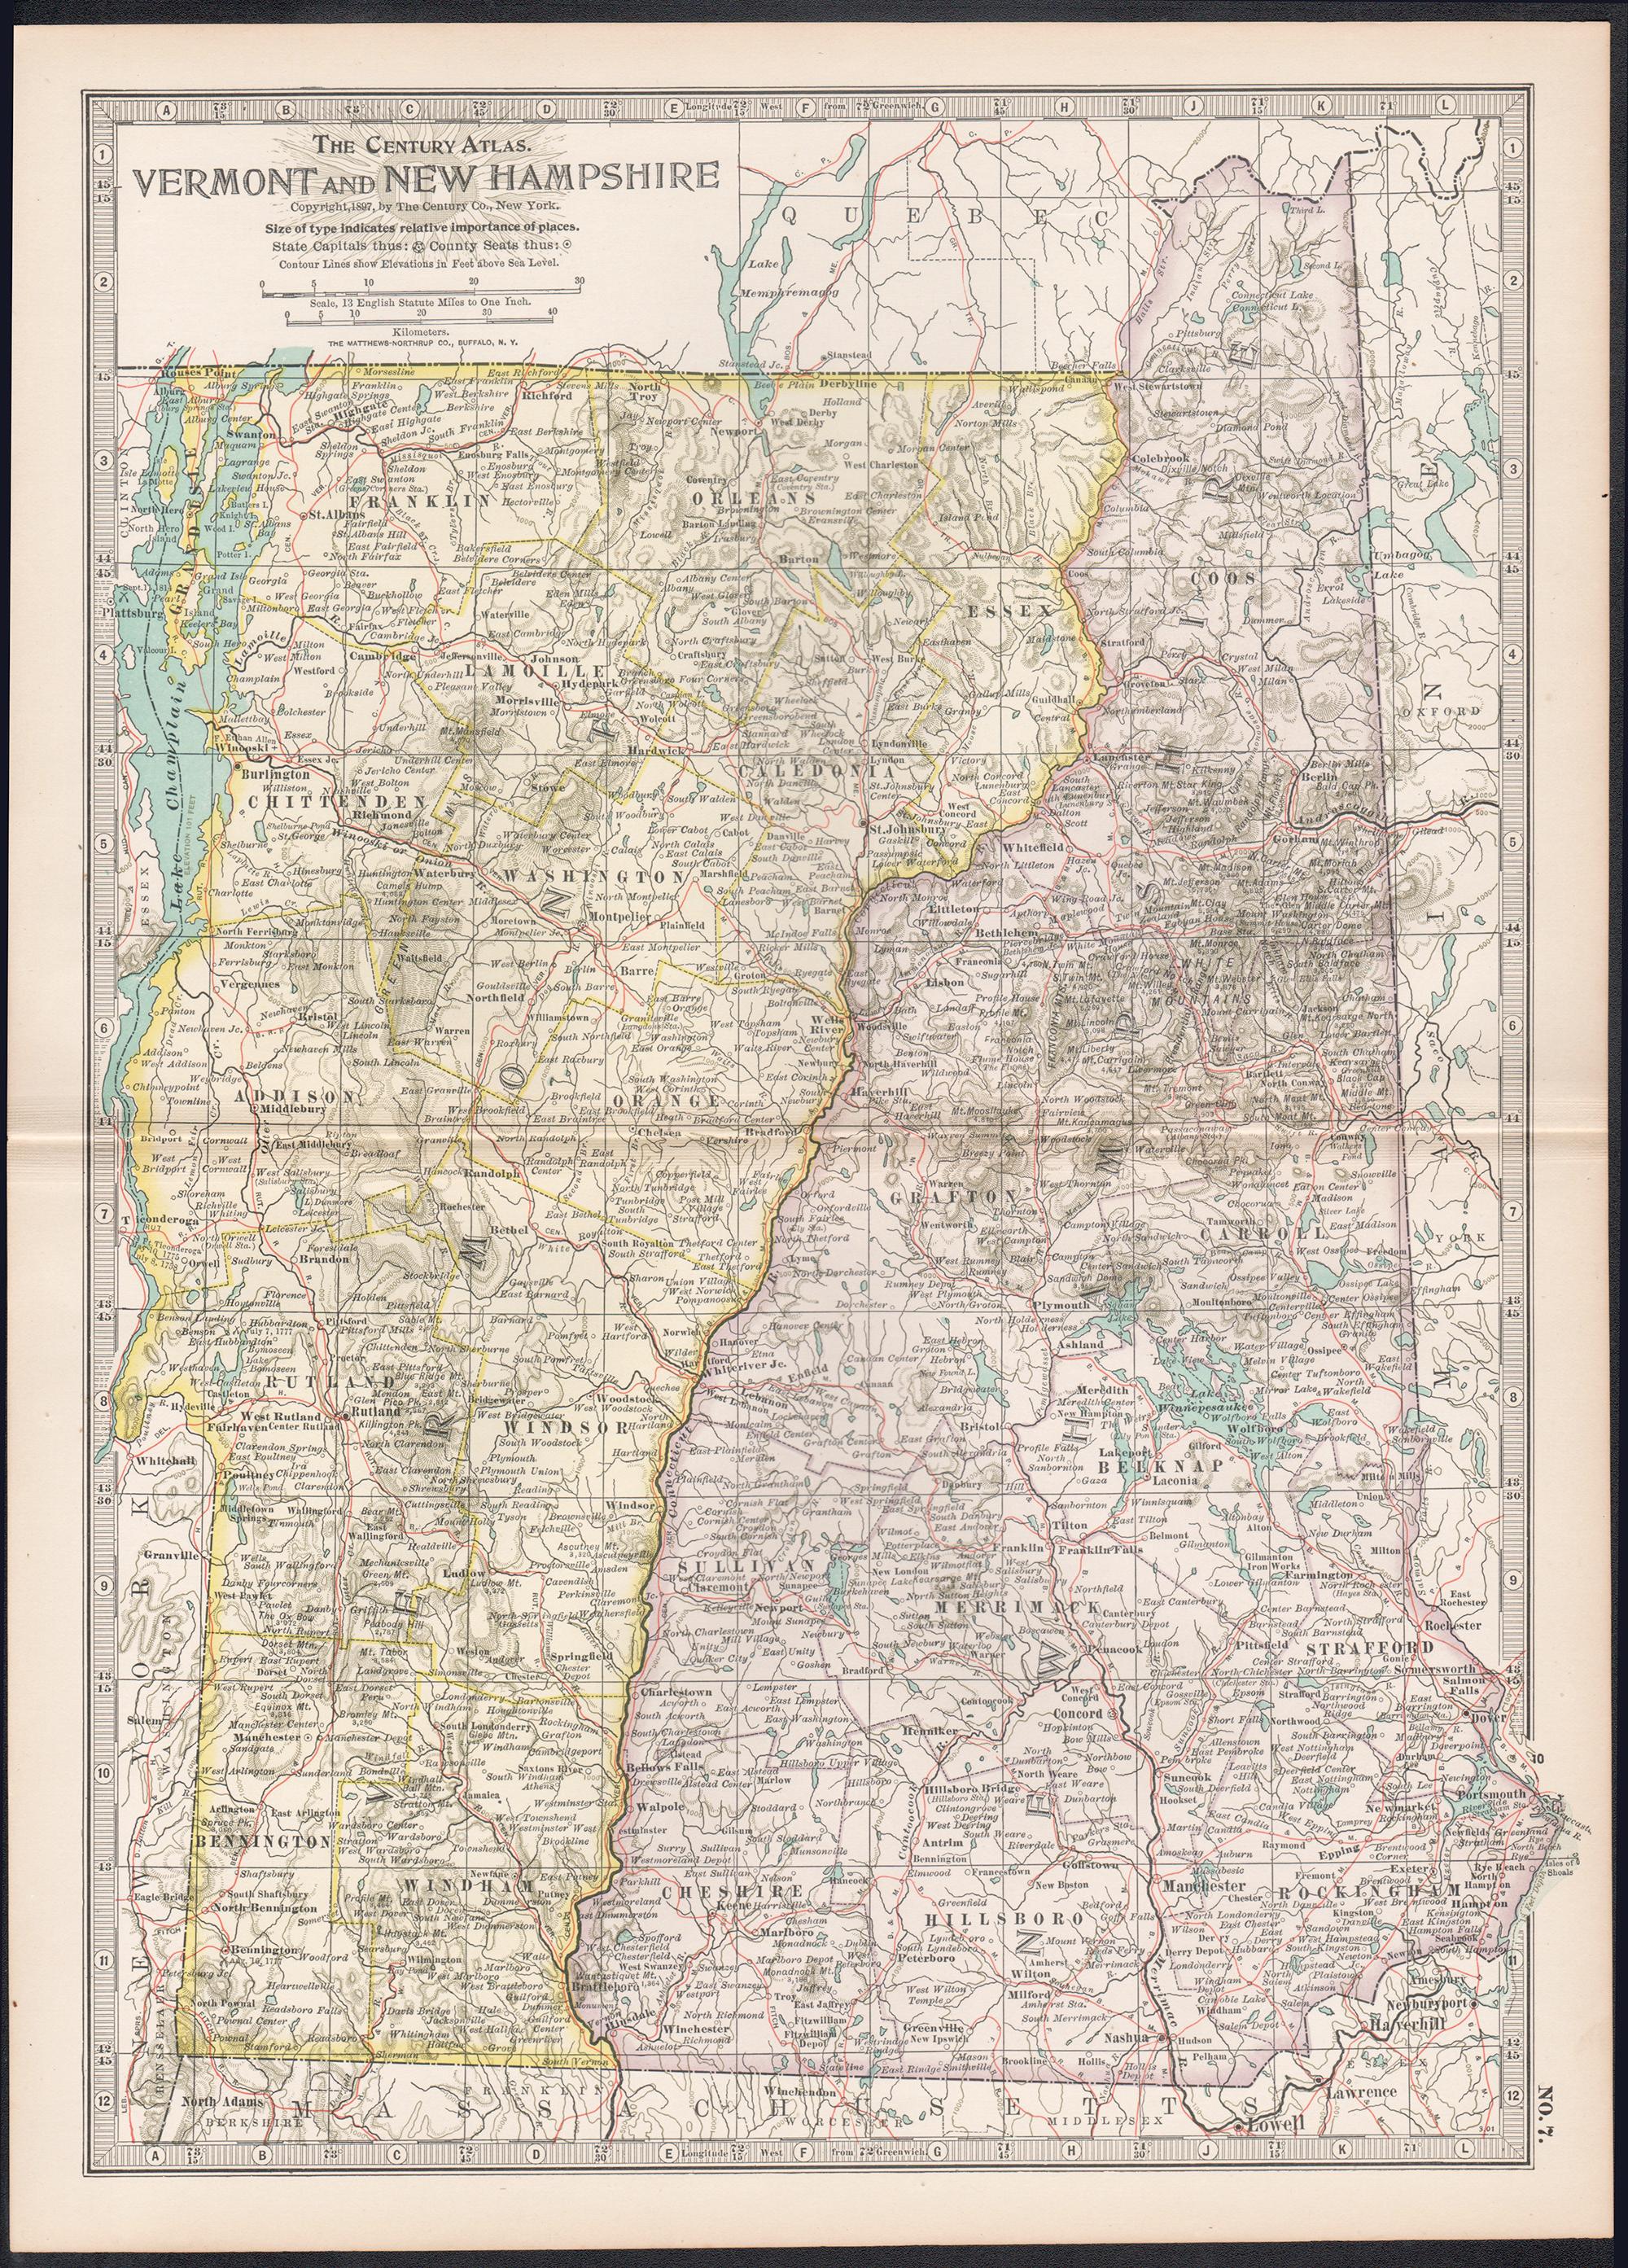 Vermont and New Hampshire. USA Century Atlas state antique vintage map - Print by Unknown